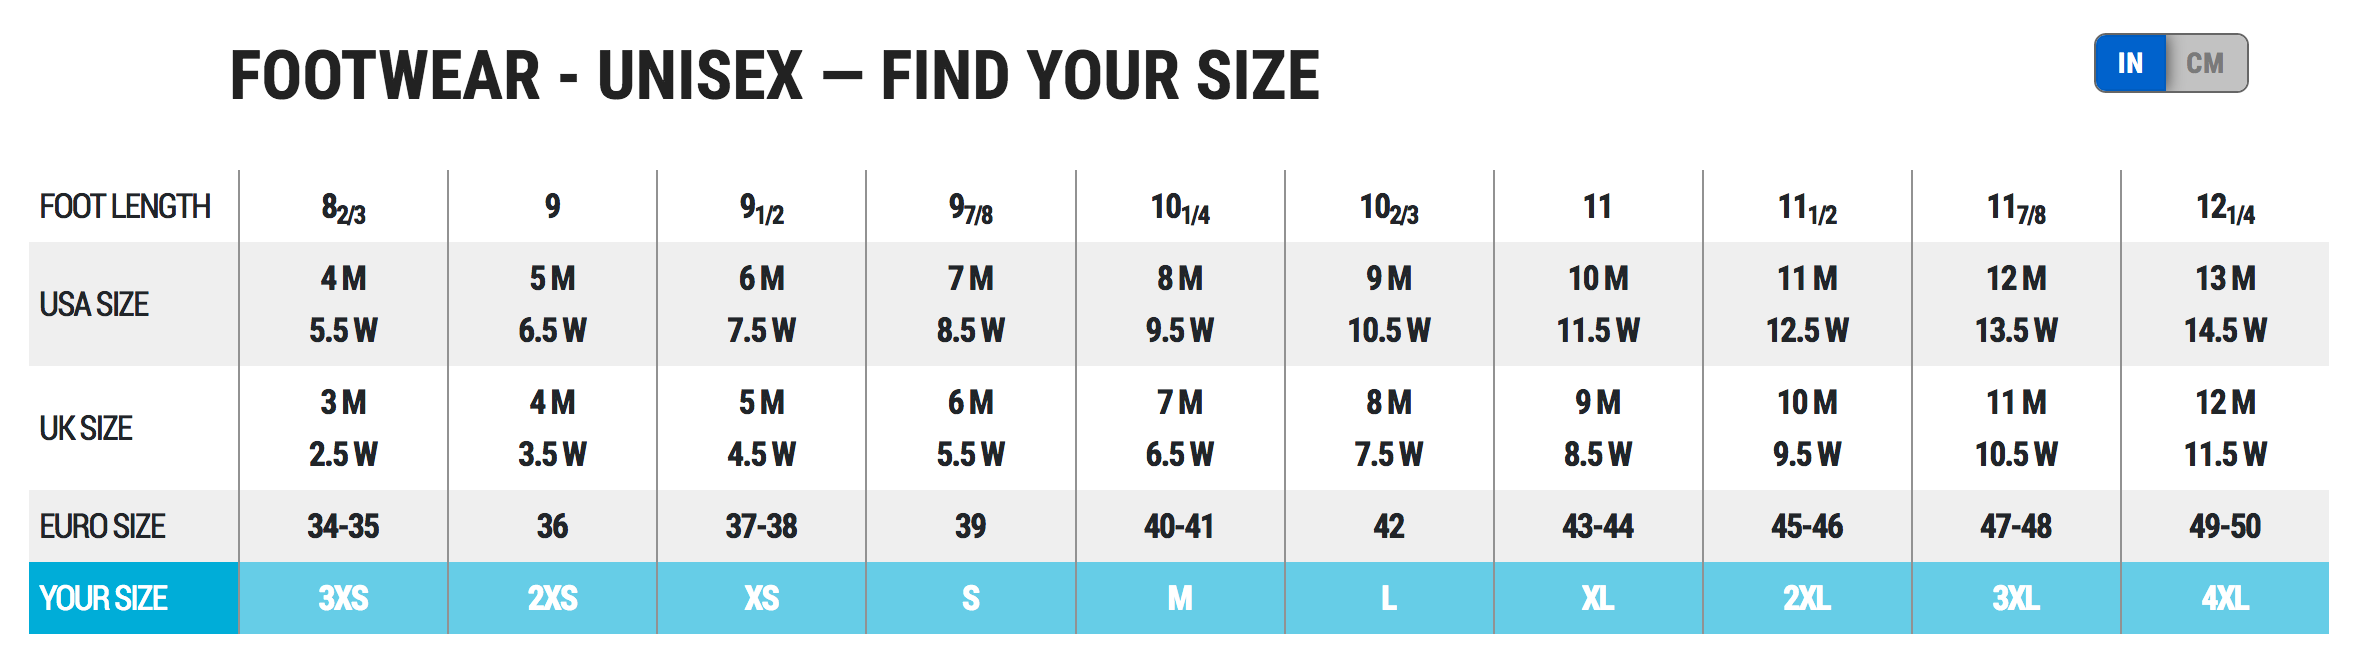 Danner Boot Sizing Chart